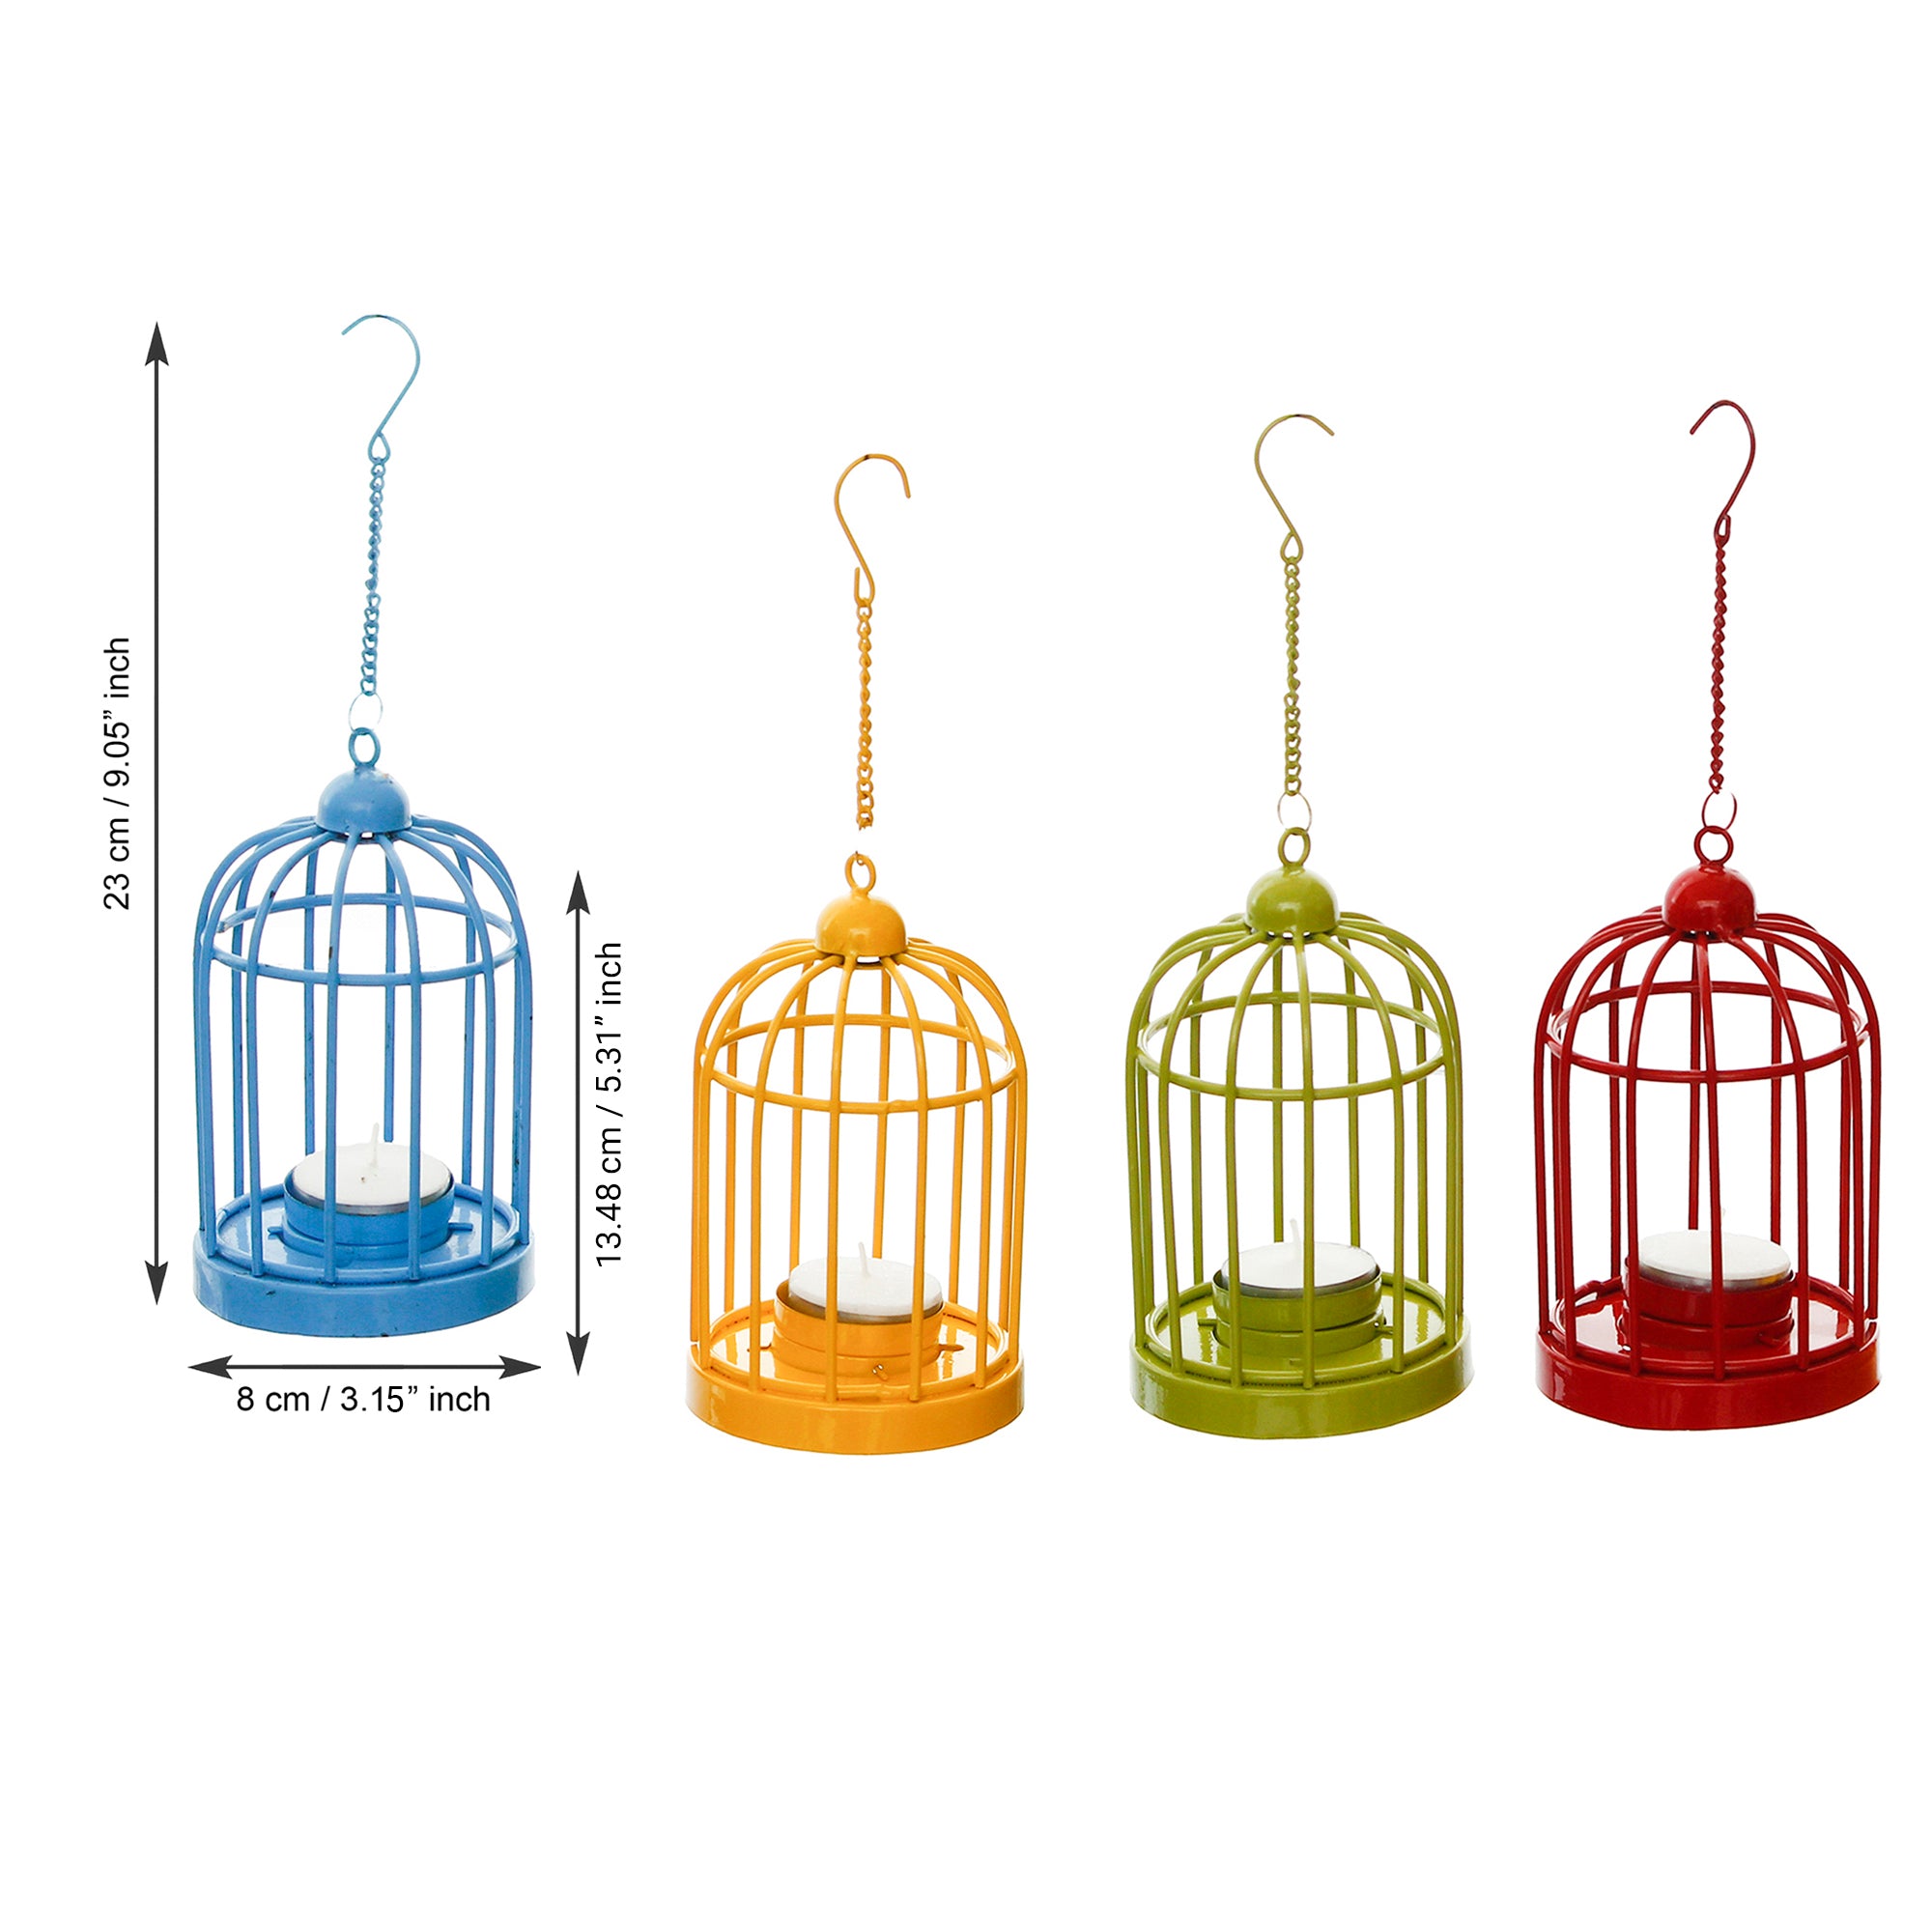 Set of 4 Colors Iron Cage Tea Light candle Holder With Hanging Chain(Blue, Green, Yellow, Red) 3